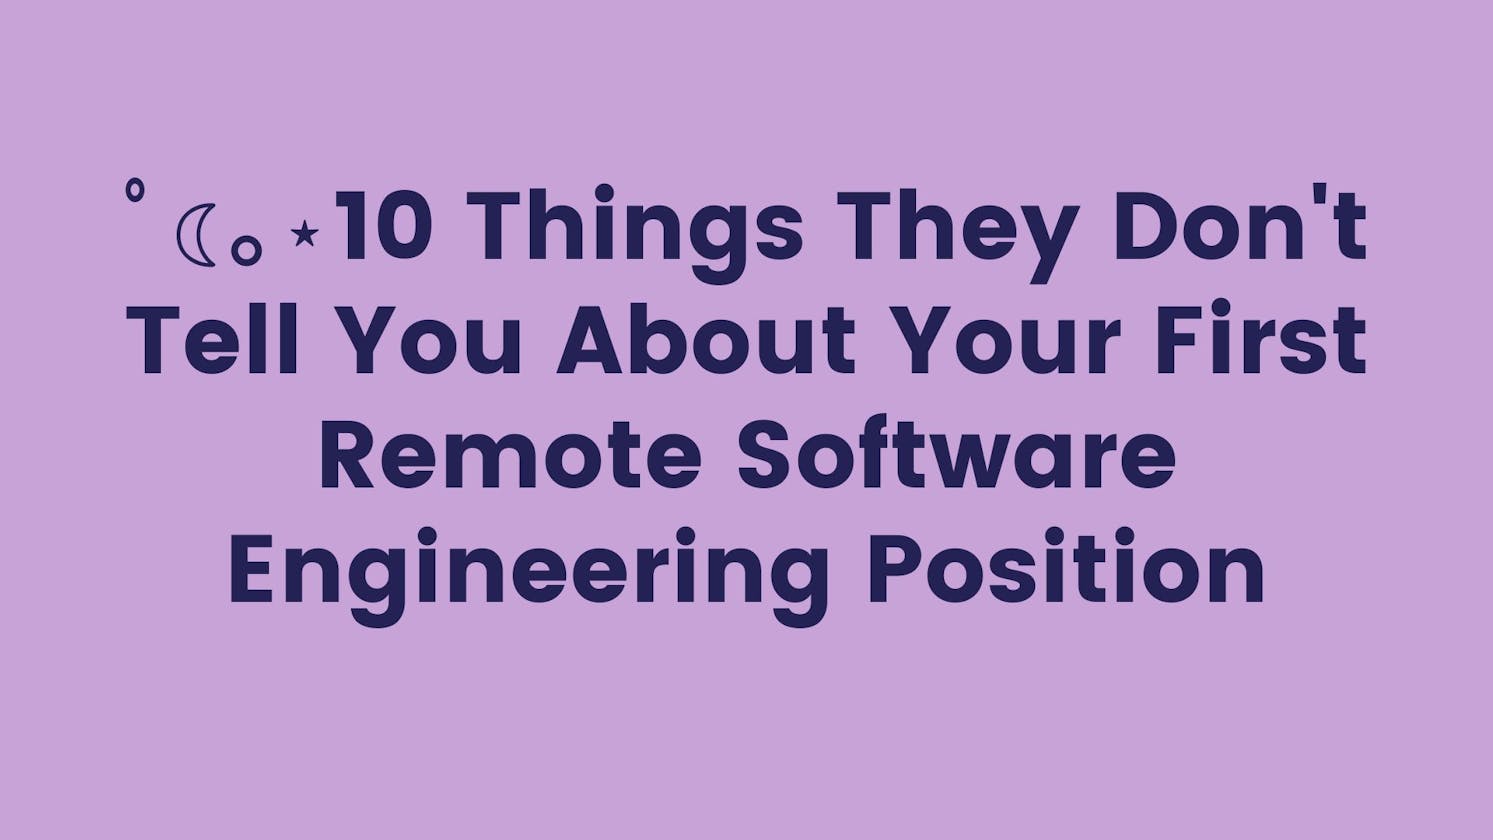 10 Things They Don't Tell You About Your First Remote Software Engineering Position